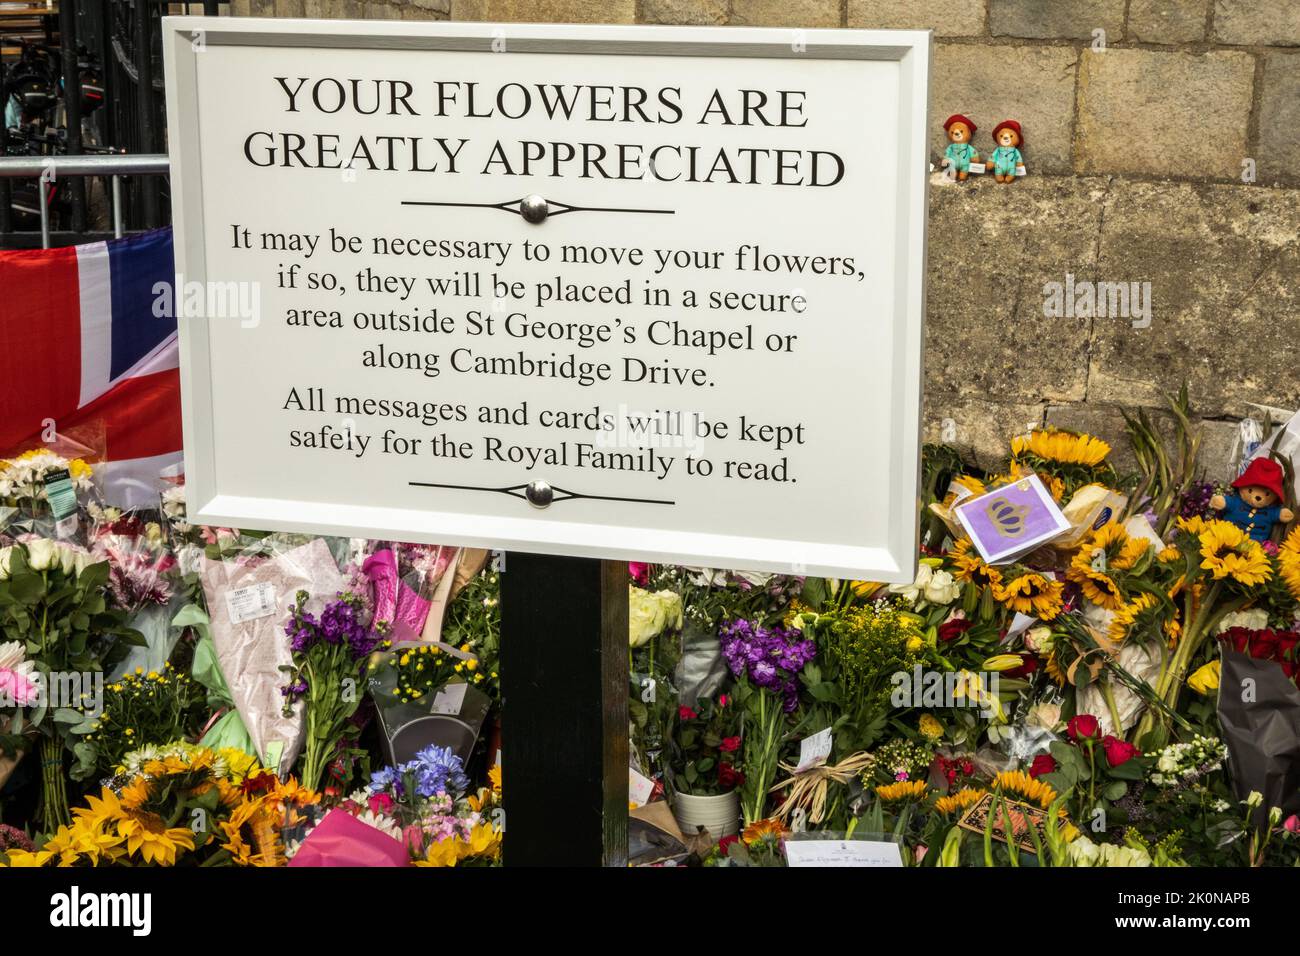 Windsor, UK. 12th September, 2022. Floral tributes to Queen Elizabeth II are displayed outside Cambridge Gate at Windsor Castle. Queen Elizabeth II, the UK's longest-serving monarch, died at Balmoral aged 96 on 8th September 2022 after a reign lasting 70 years. Credit: Mark Kerrison/Alamy Live News Stock Photo